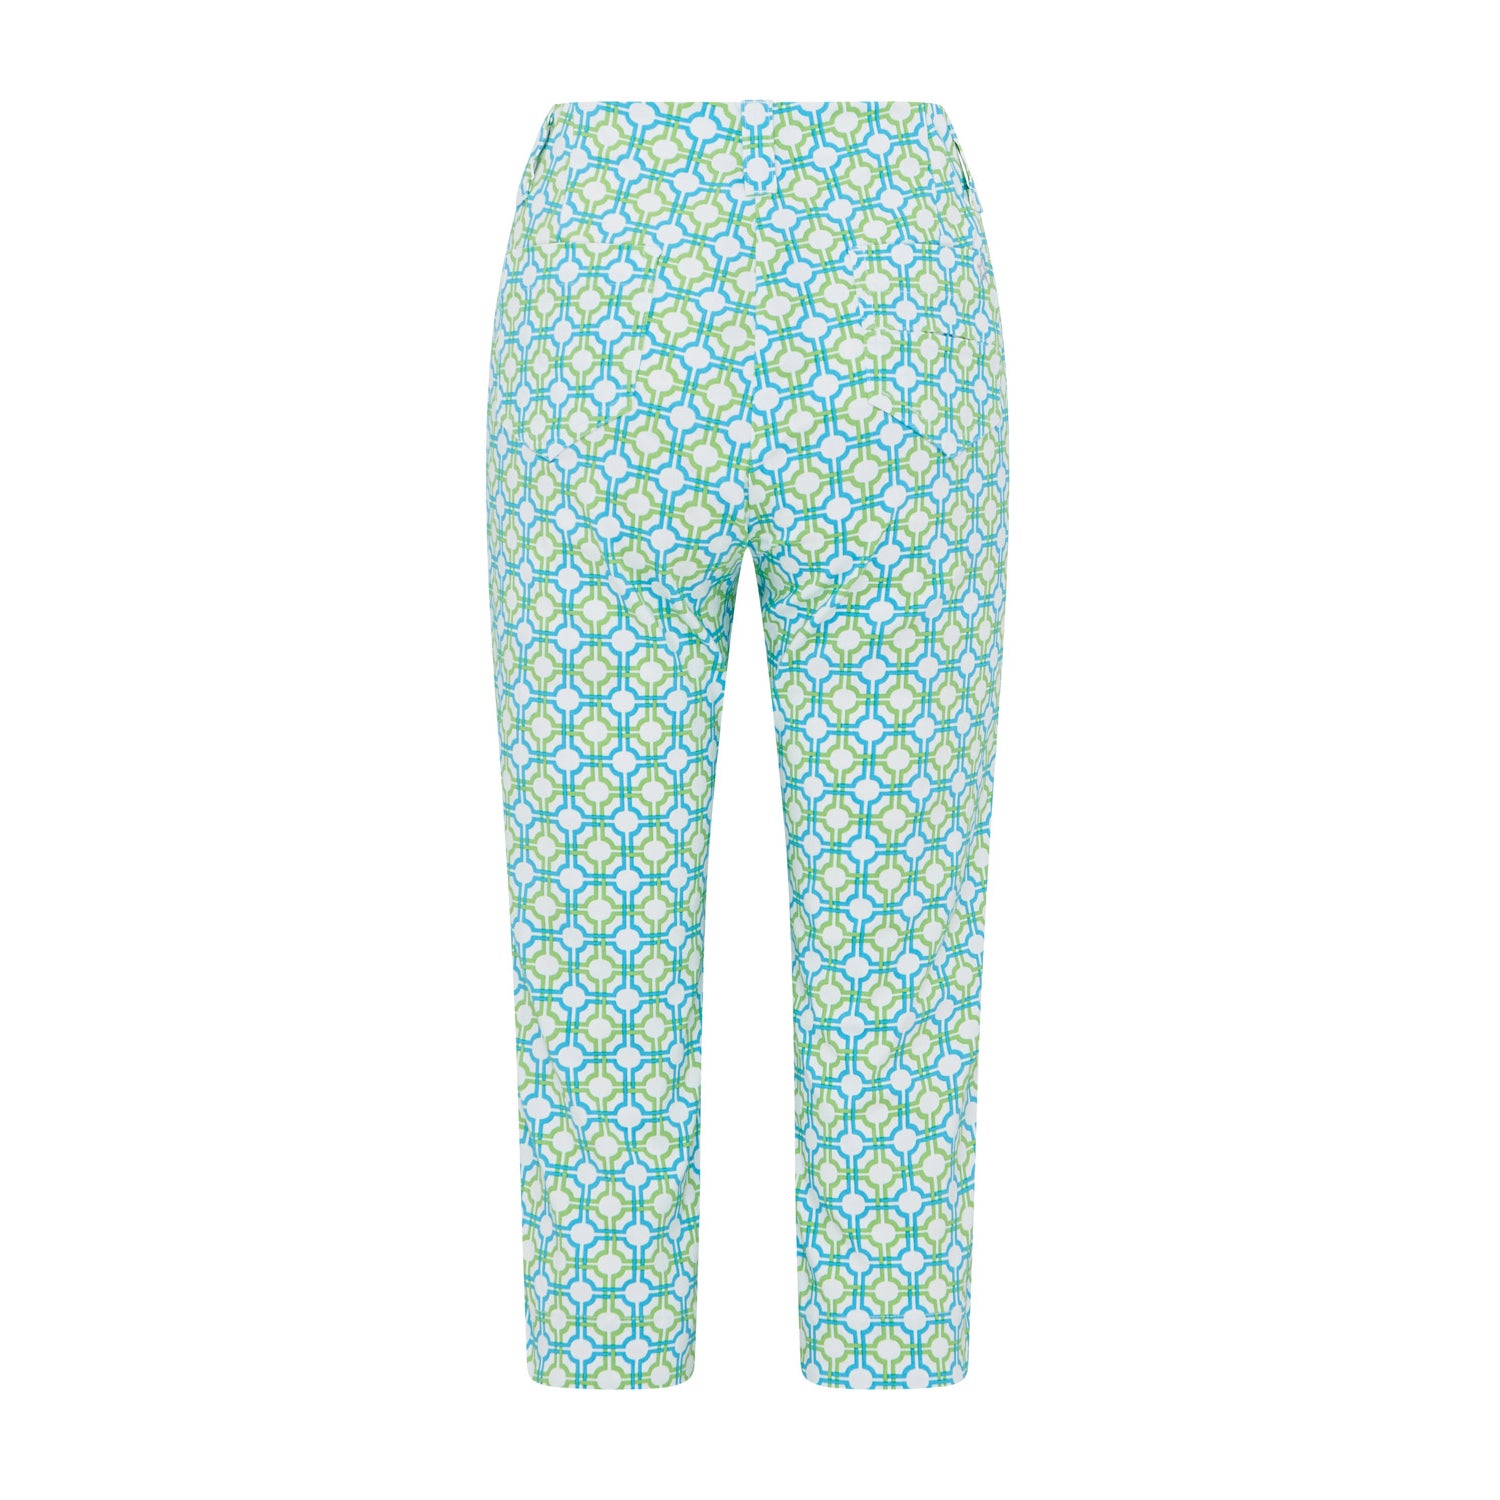 Swing Out Sister Women's Pull-On Capris in Dazzling Blue and Emerald with Mosaic Pattern